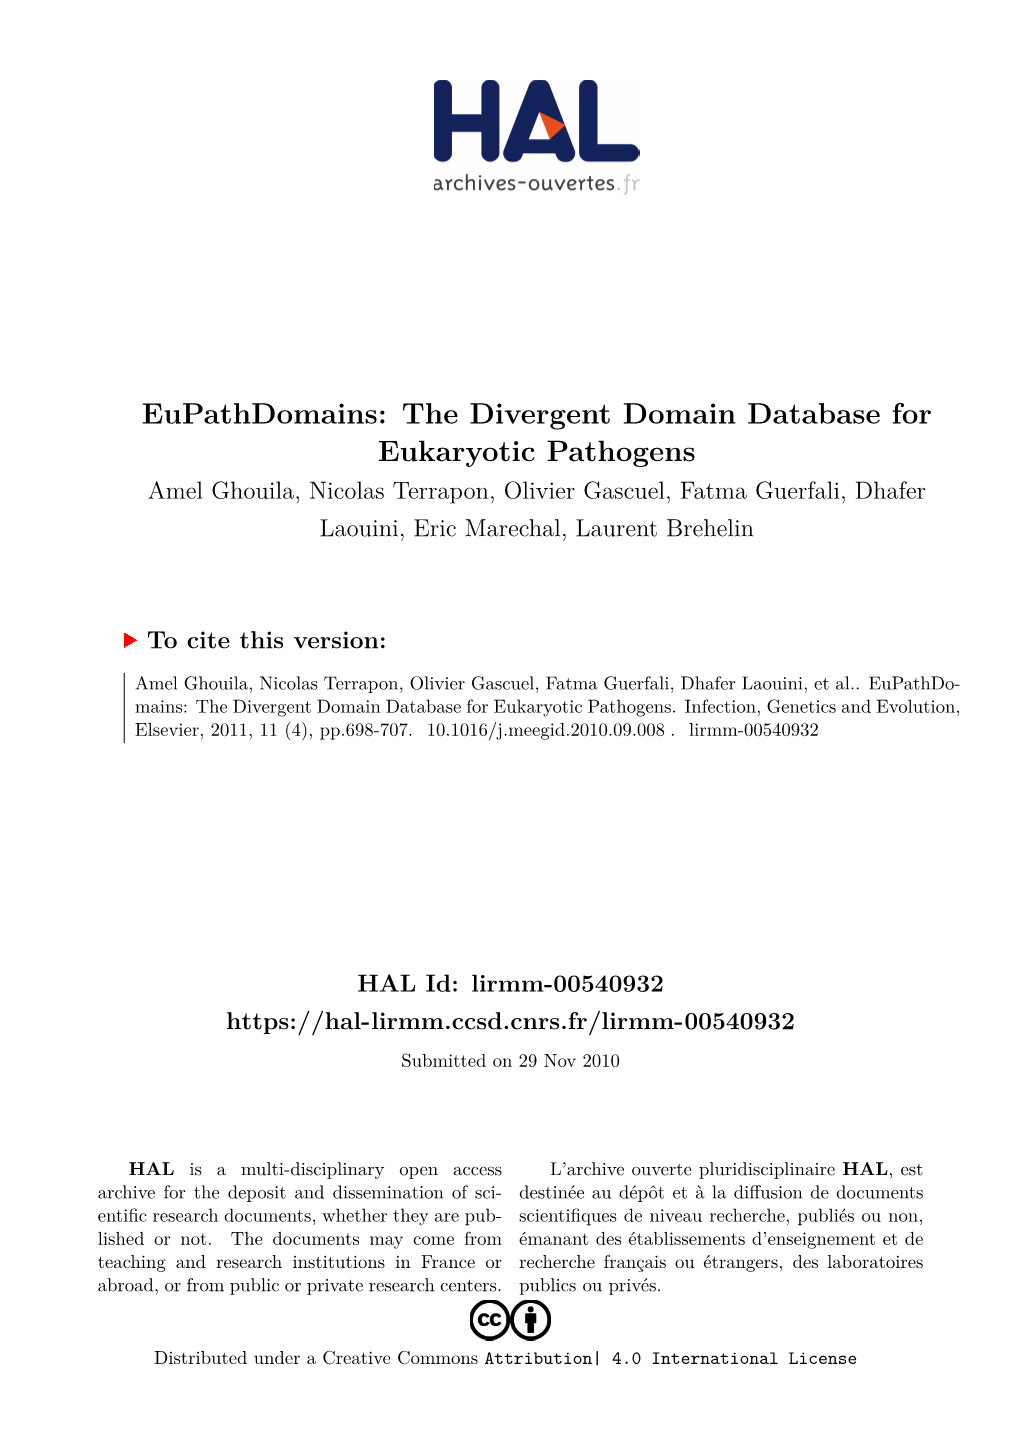 The Divergent Domain Database for Eukaryotic Pathogens